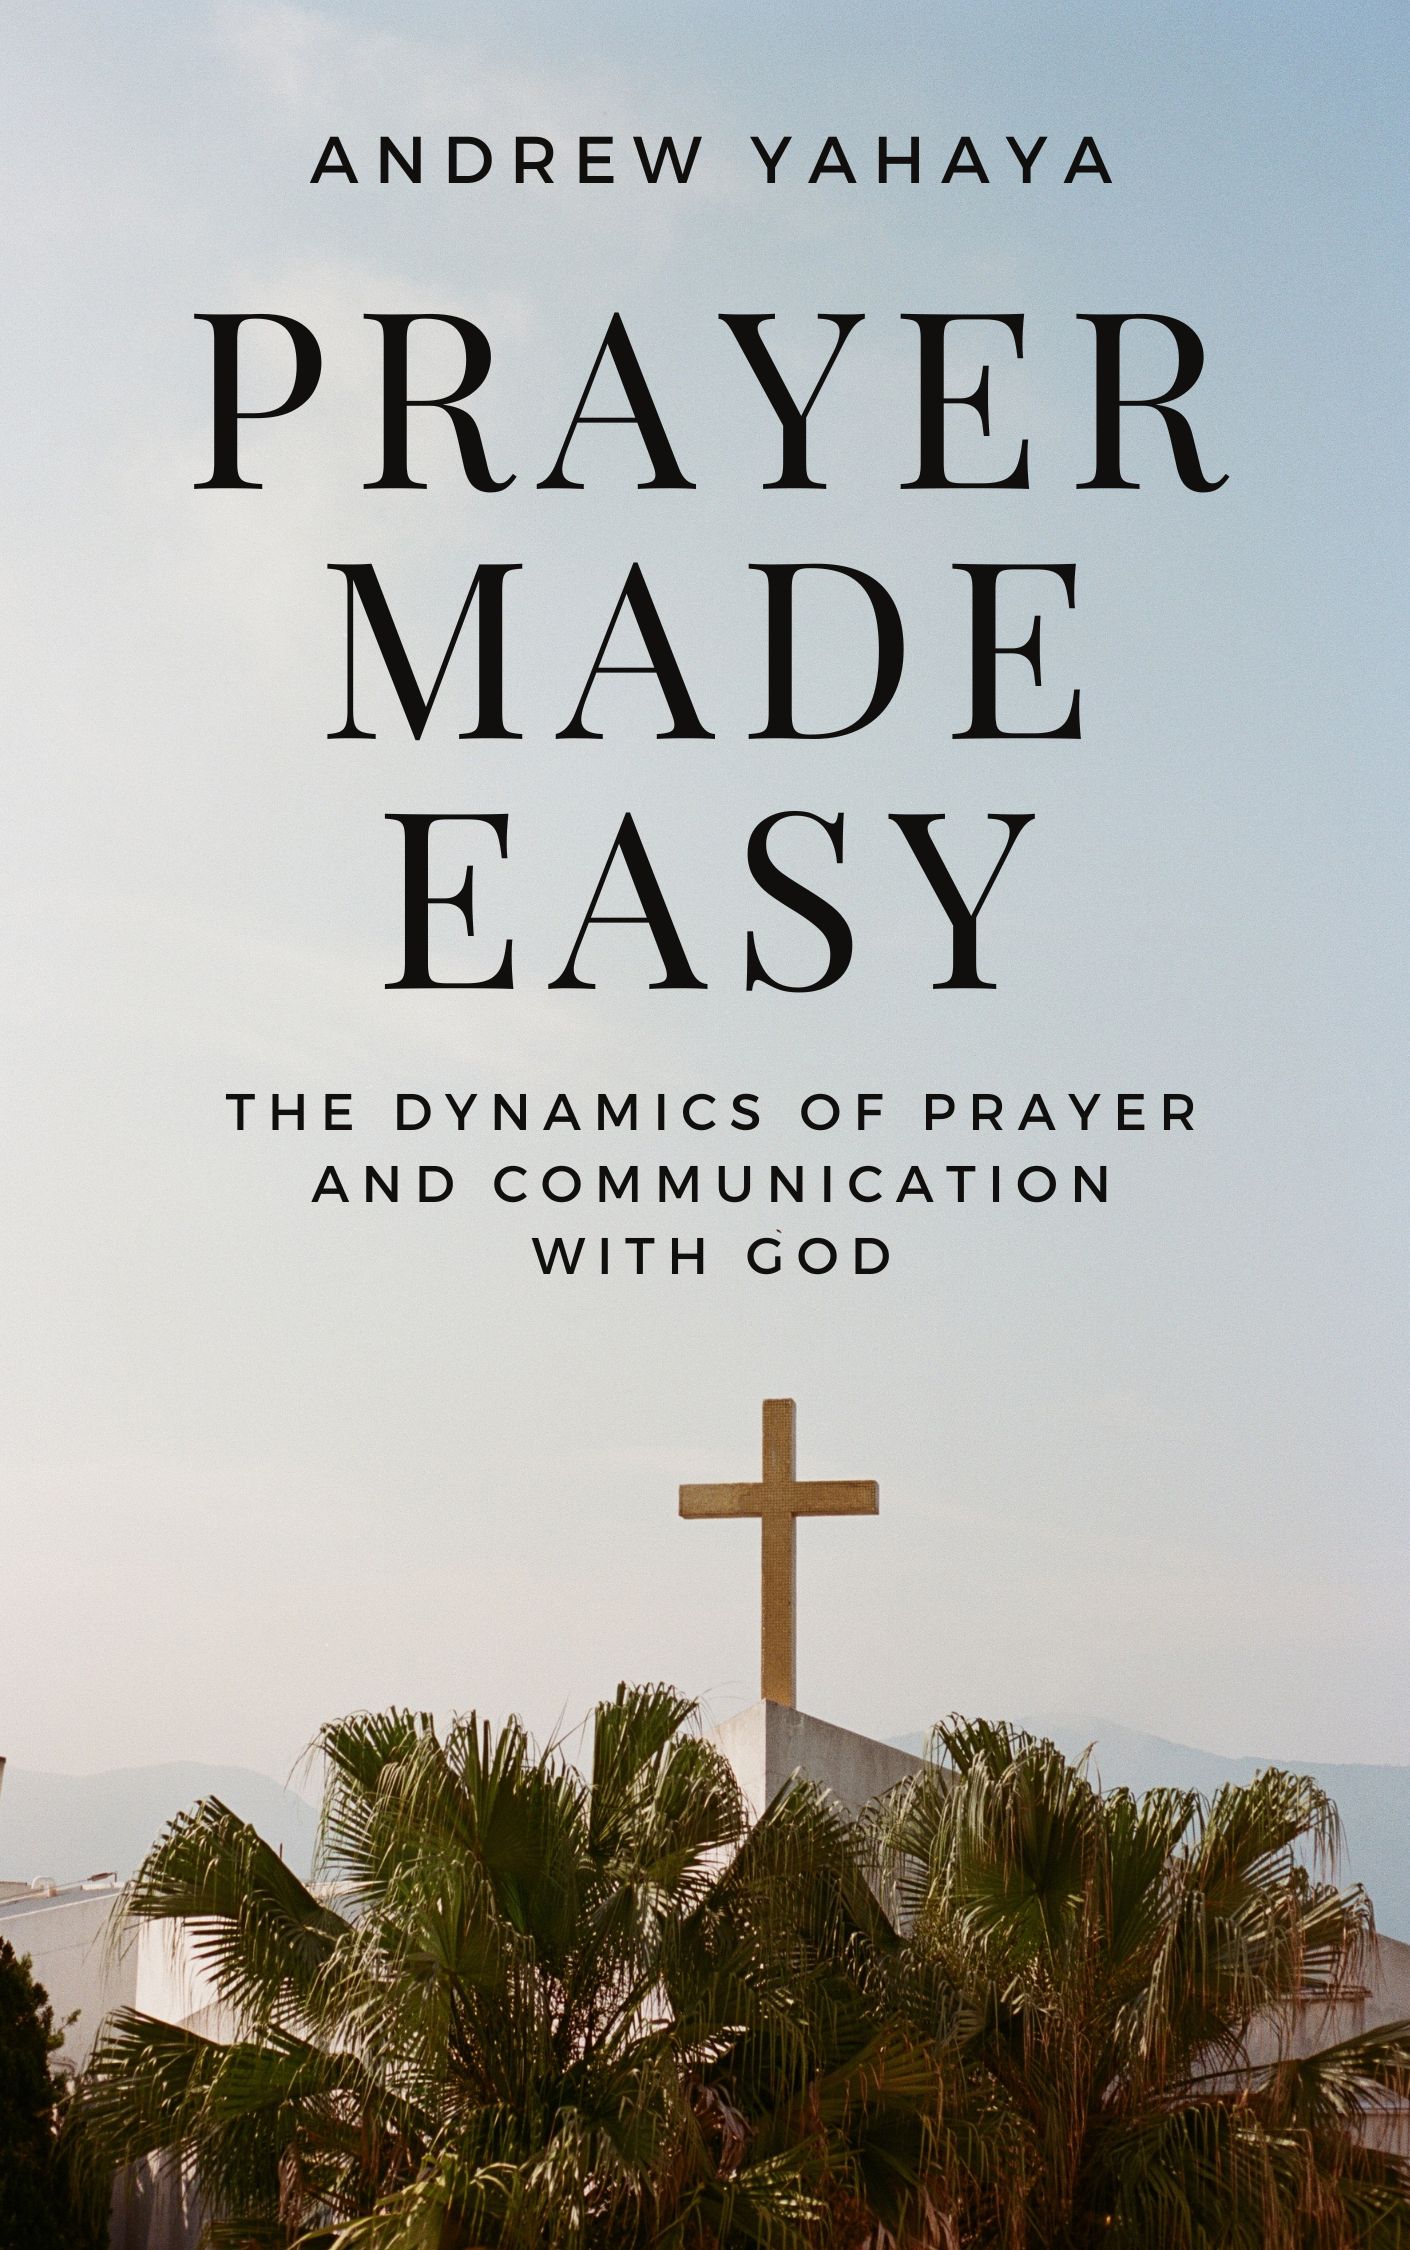 Prayer-Made-Easy--The-Dynamics-Of-Prayer-And-Communication-With-God